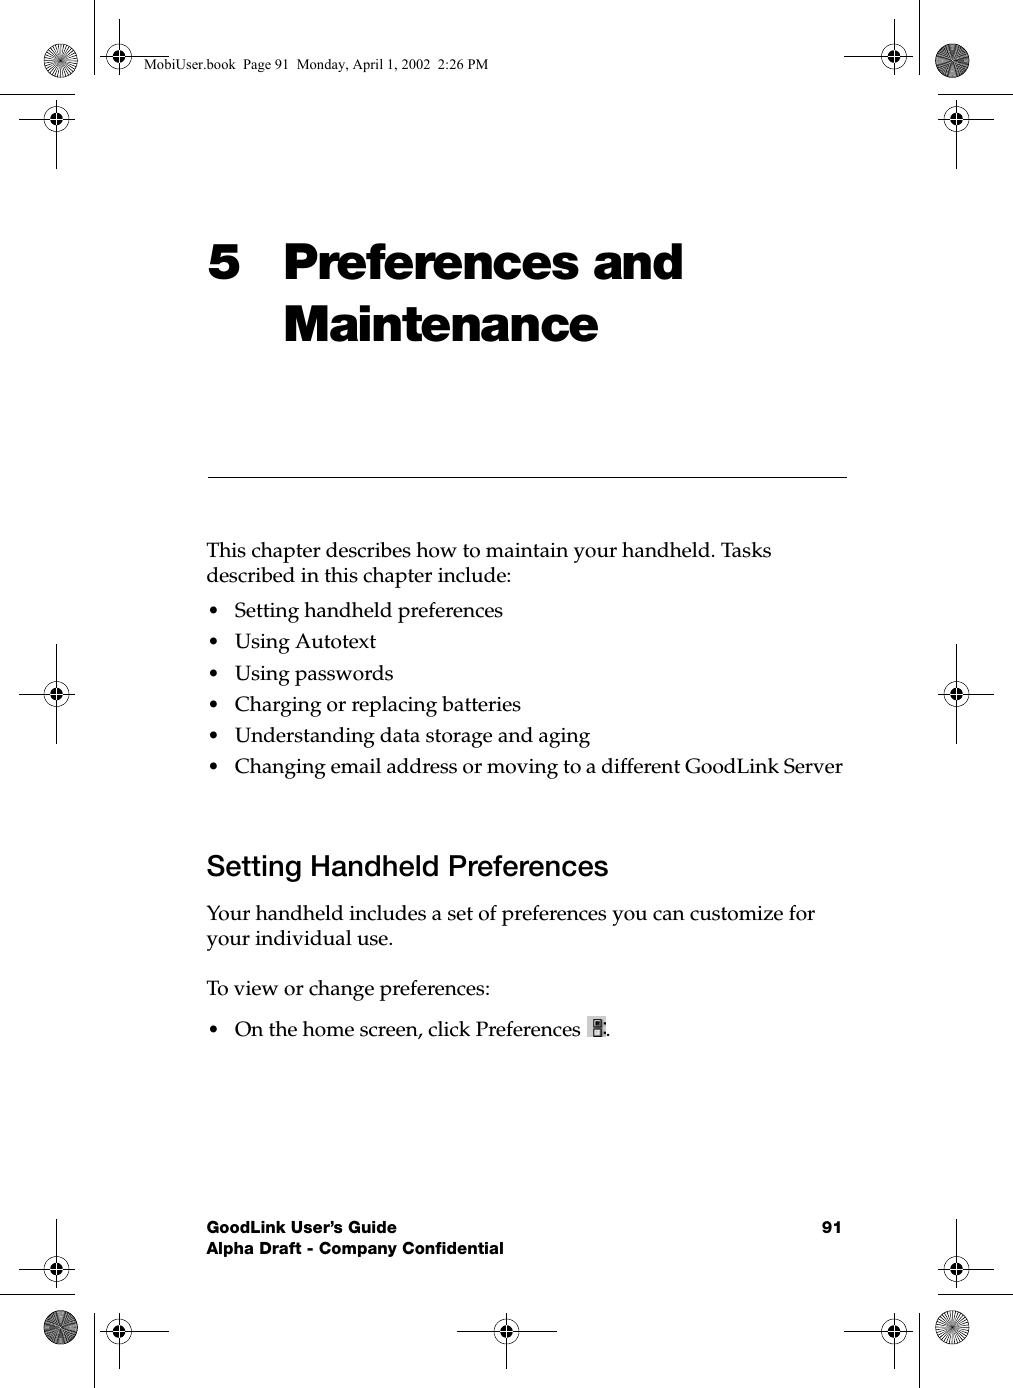 GoodLink User’s Guide 91Alpha Draft - Company Confidential5 Preferences and MaintenanceThis chapter describes how to maintain your handheld. Tasks described in this chapter include:•Setting handheld preferences•Using Autotext•Using passwords•Charging or replacing batteries•Understanding data storage and aging•Changing email address or moving to a different GoodLink ServerSetting Handheld PreferencesYour handheld includes a set of preferences you can customize for your individual use. To view or change preferences:•On the home screen, click Preferences  .MobiUser.book  Page 91  Monday, April 1, 2002  2:26 PM